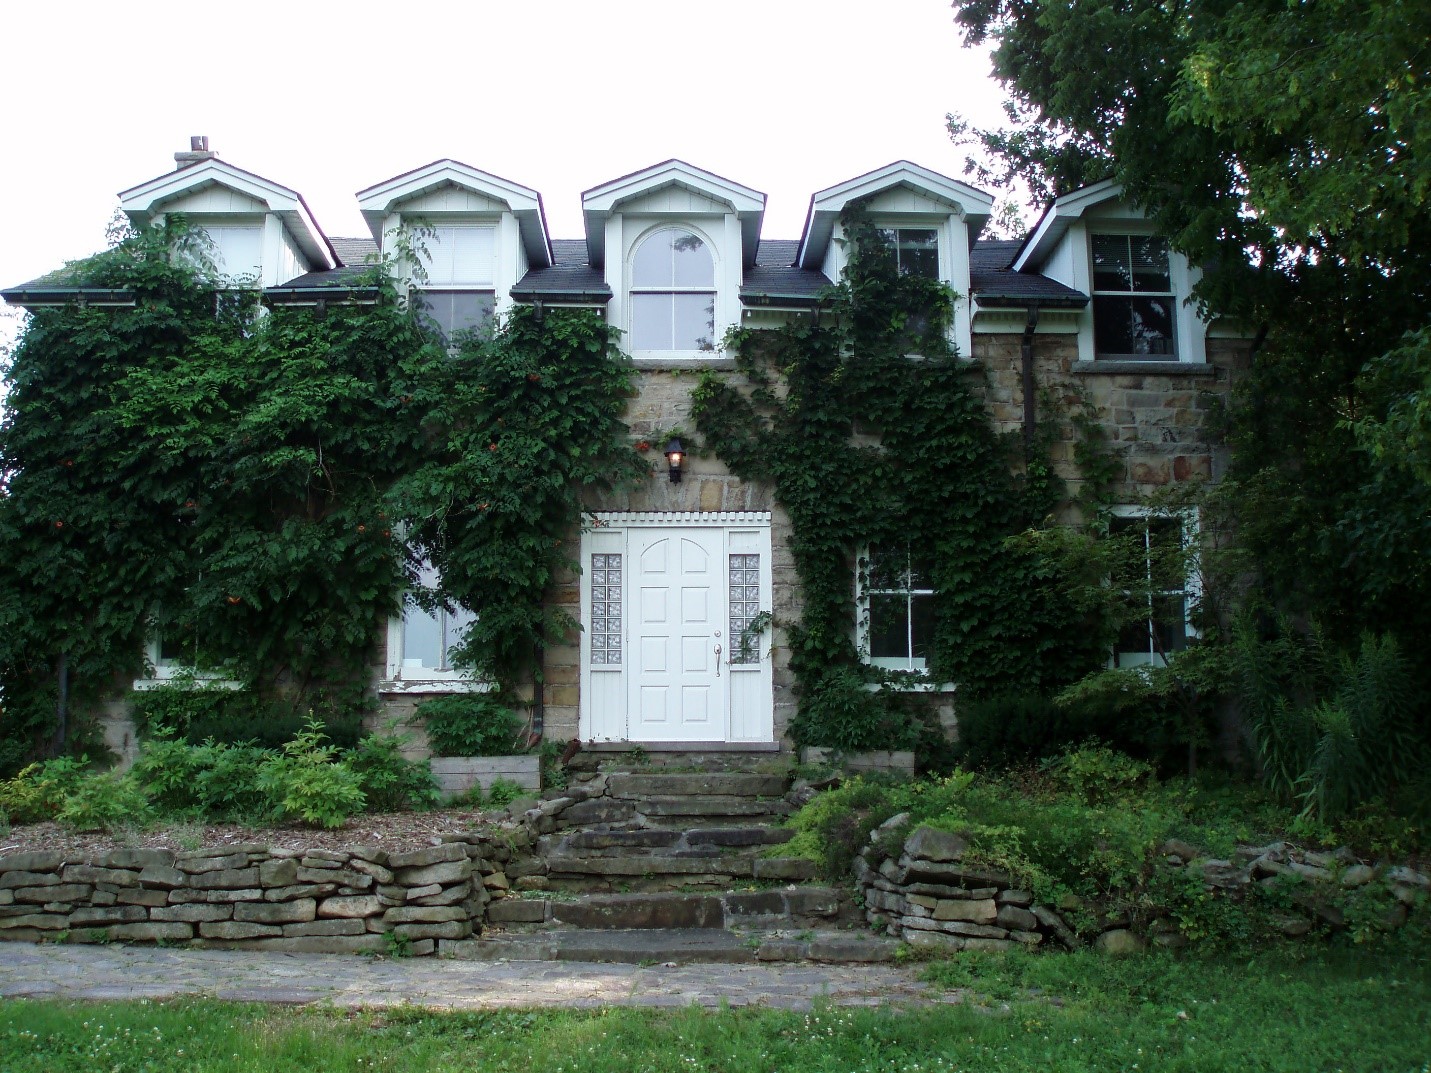 Veevers Estate pictured from the front entrance